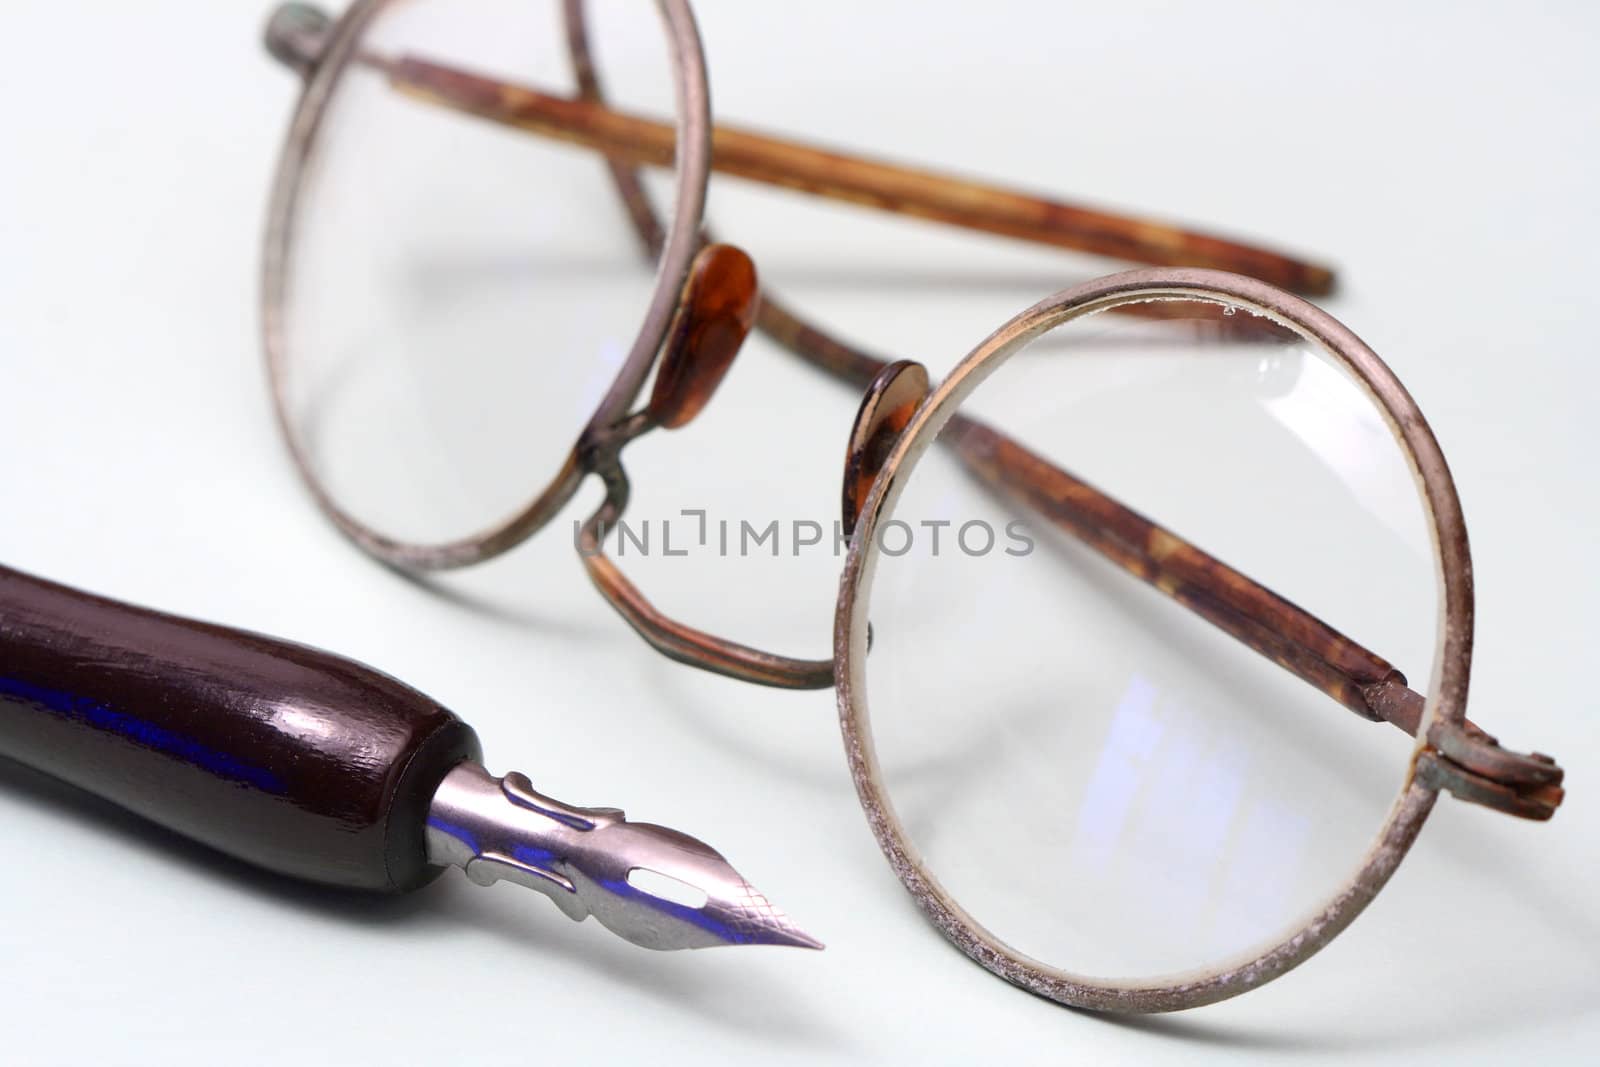 Closeup of old spectacles and fountain pen on gray background